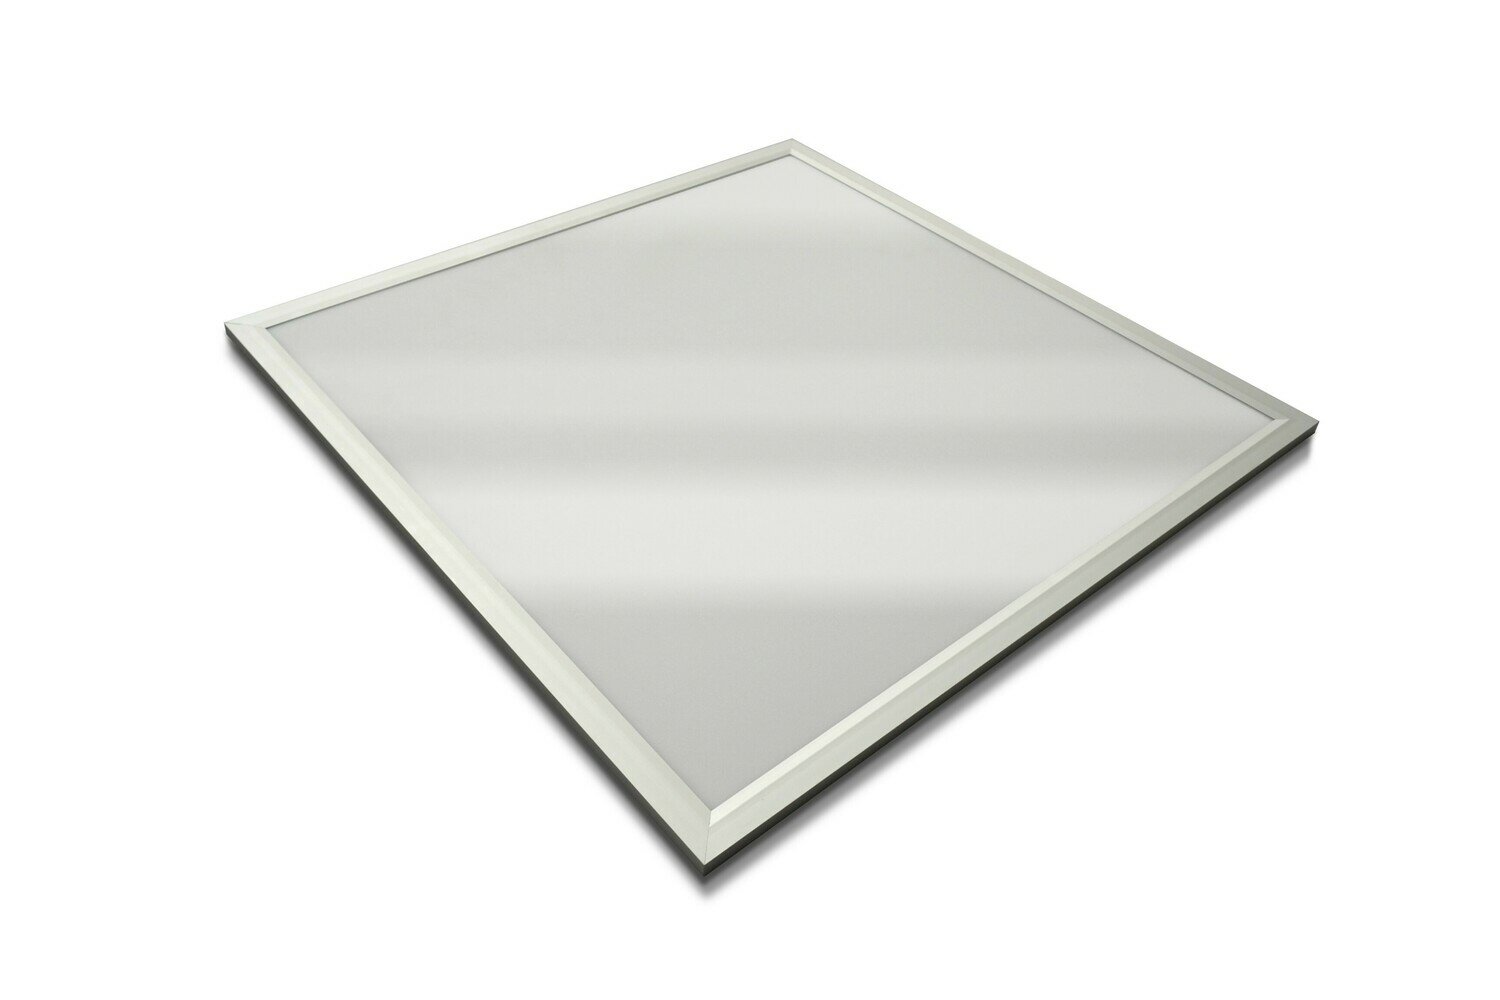 ProLuce® LED Panel PIAZZA SP 595x595x10 mm 48W, 2700K, 4320 lm, 110°, IP20, weiss, 0-10V dimmbar